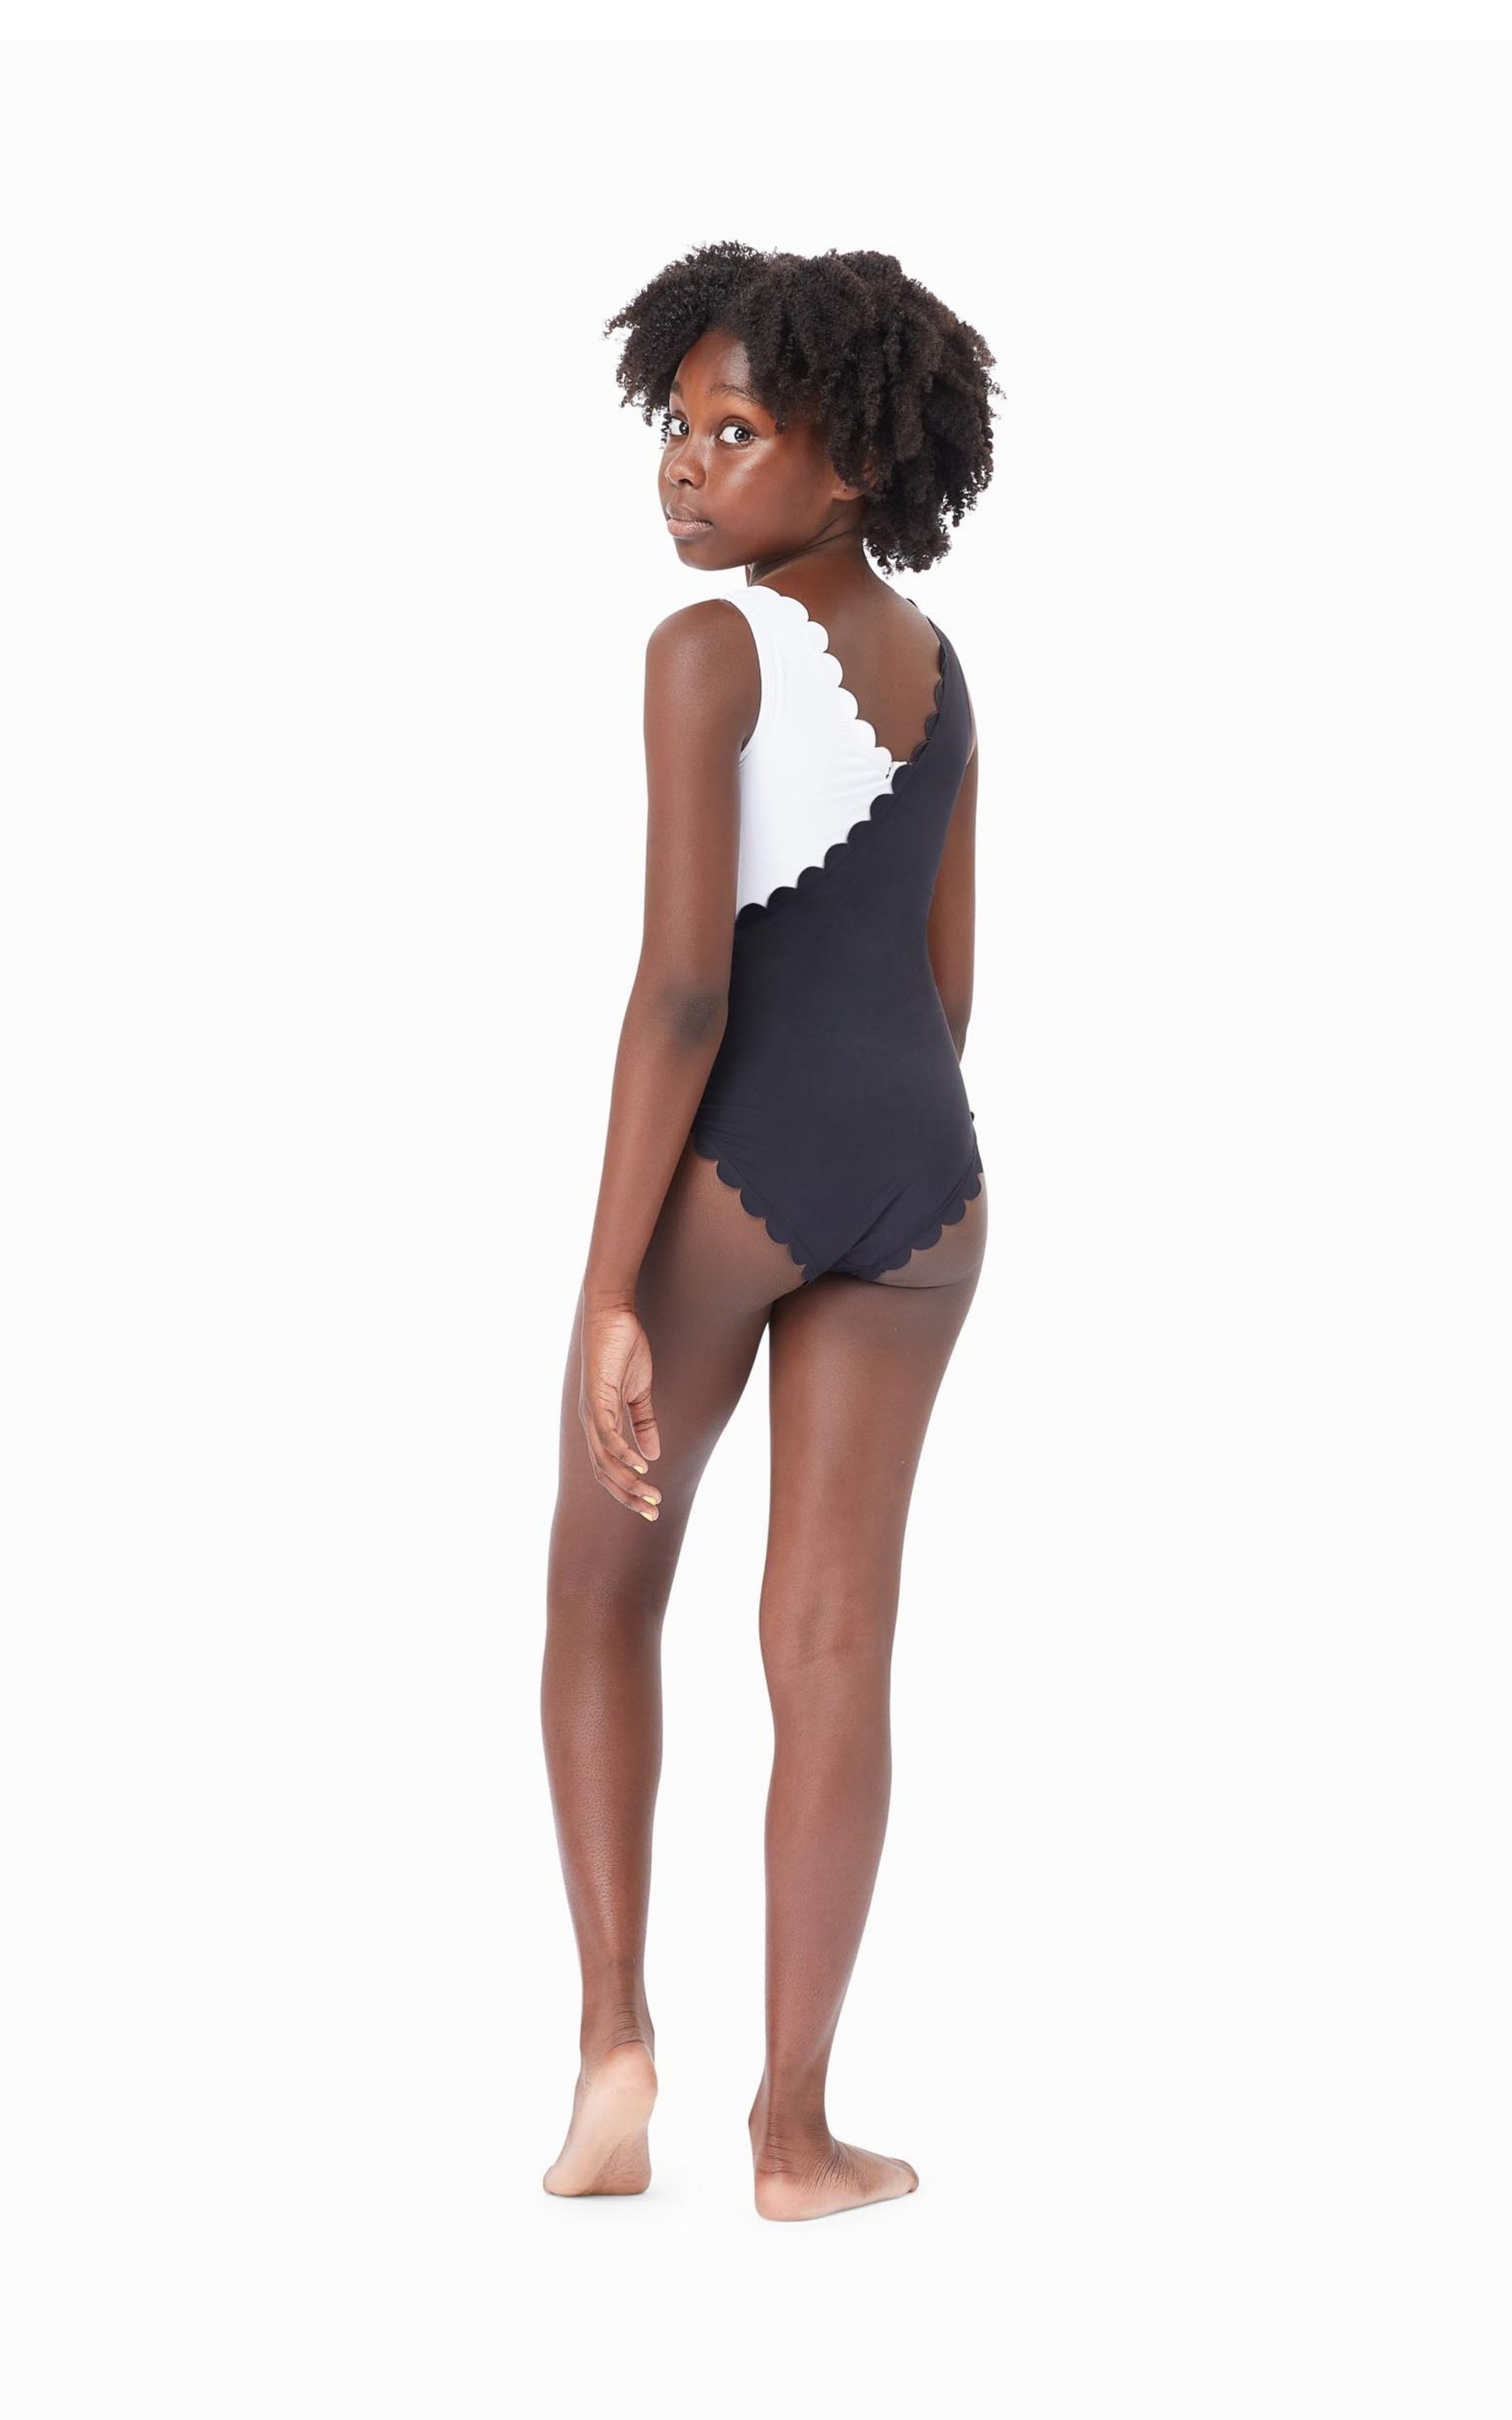 Back of young girl wearing black-and-white color block one-piece swimsuit with scalloped trim